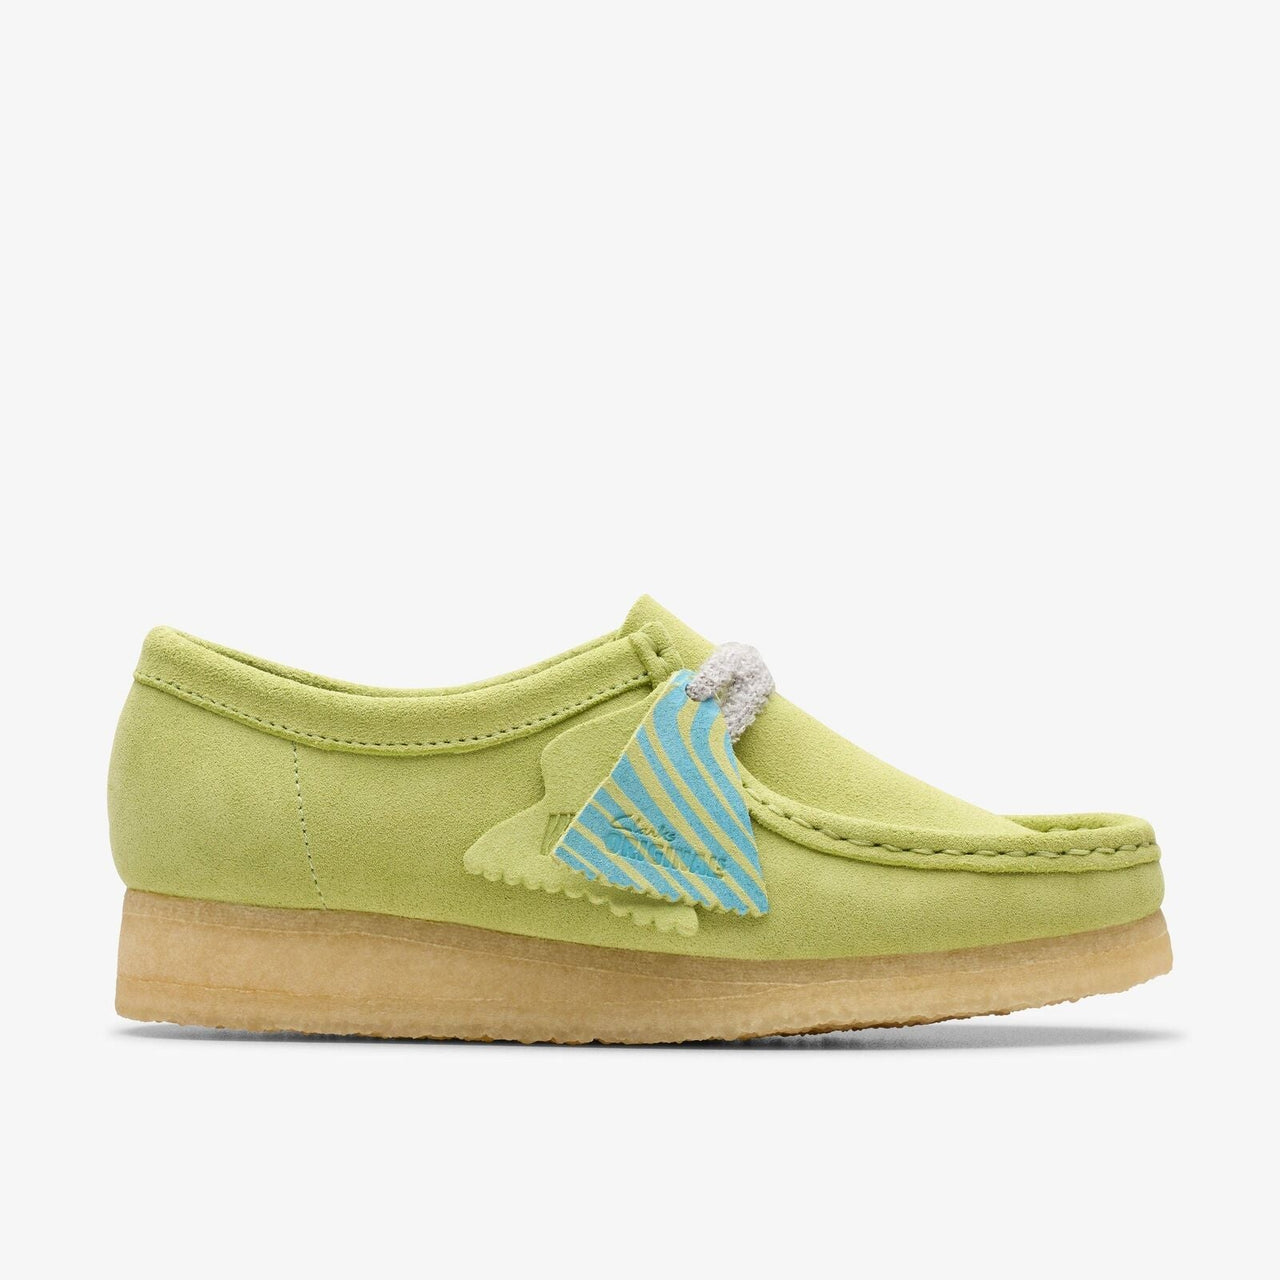 Clarks Women Wallabee Pale Lime Suede 26175670 shoes on white background